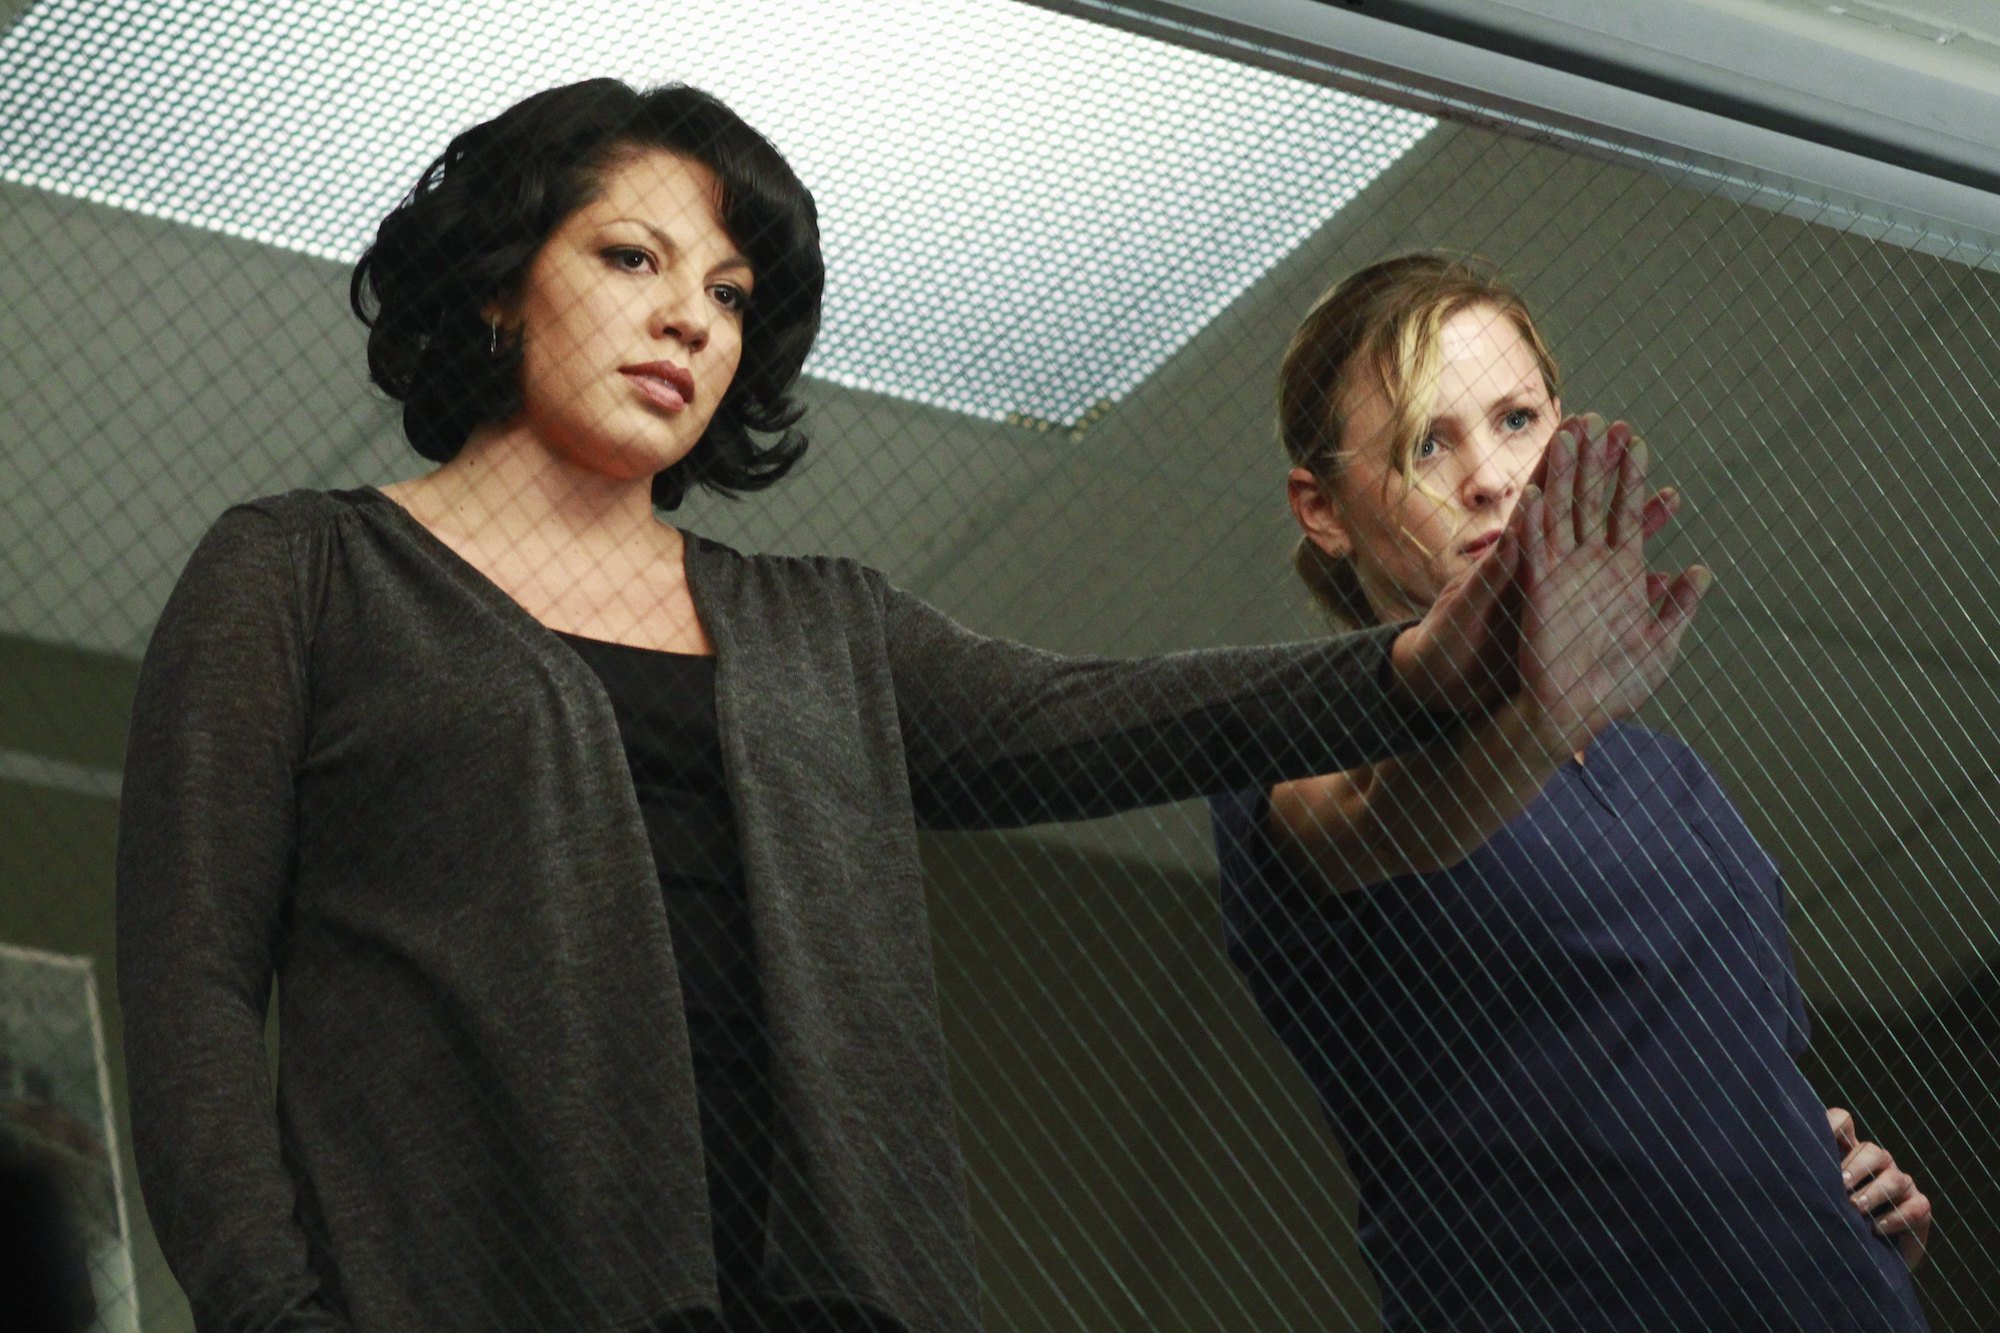 Sara Ramirez, and Jessica Capshaw holding hands in a hospital room in 'Grey's Anatomy.'